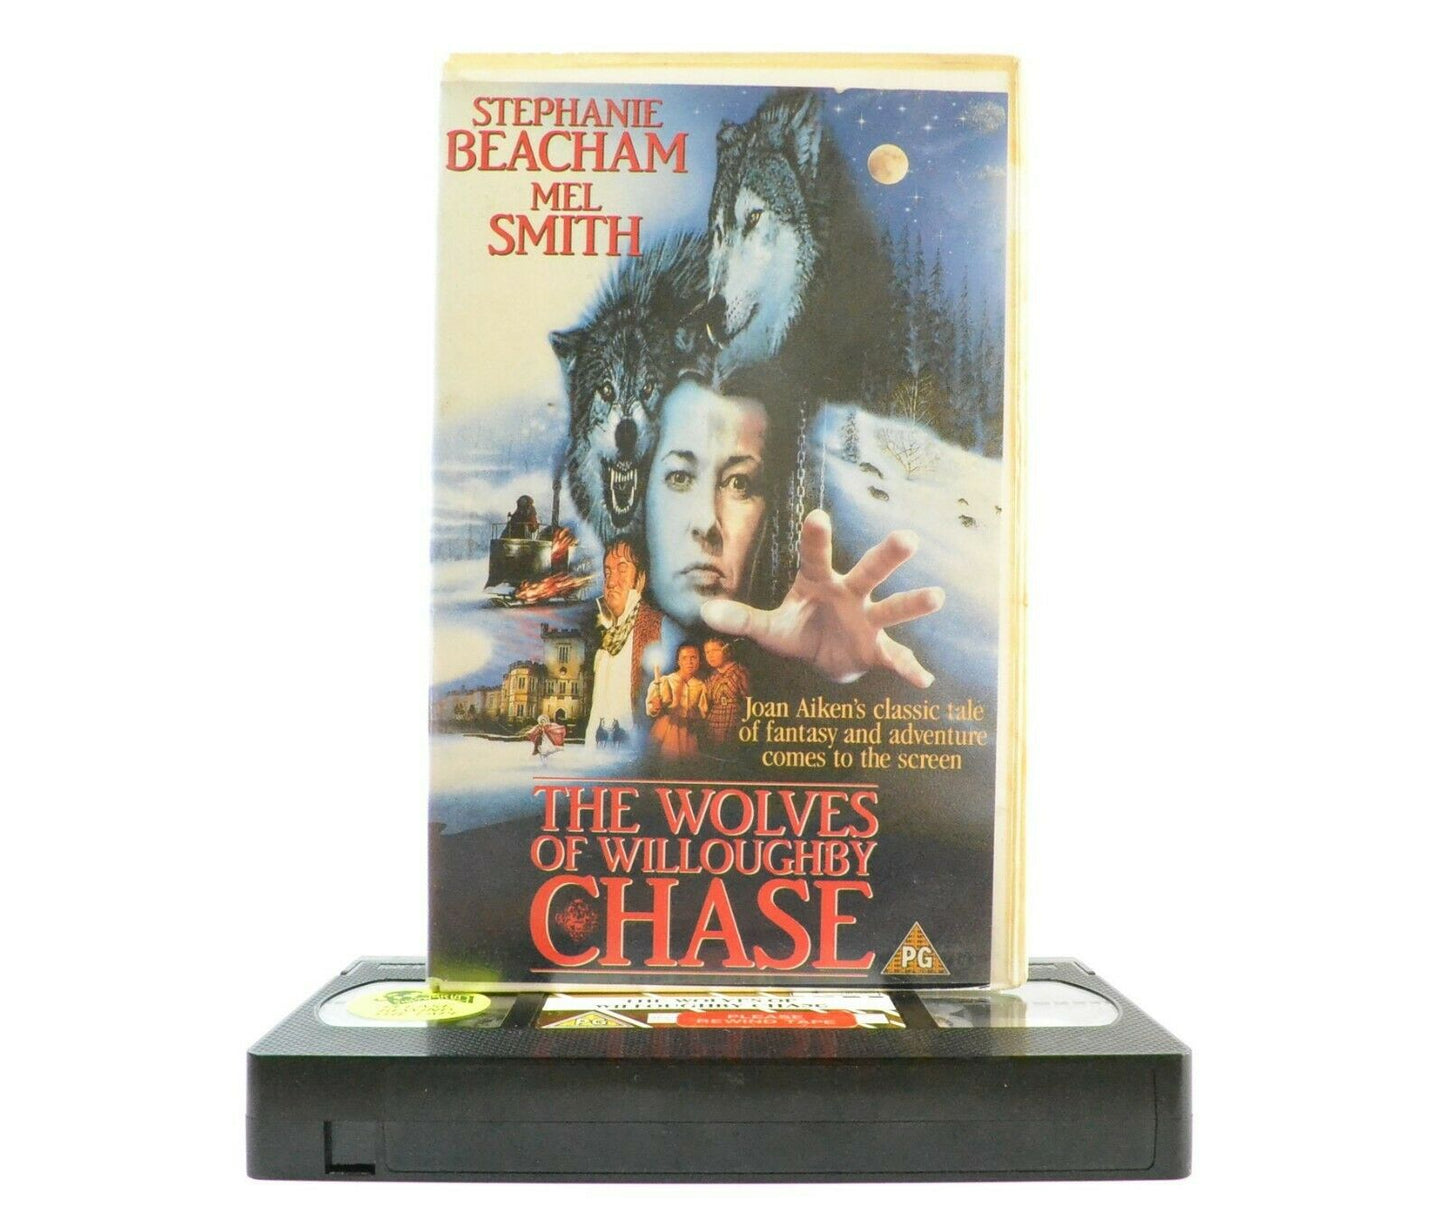 The Wolves Of Willoughby: Based On J.Aiken Book - Large Box - Drama - Pal VHS-